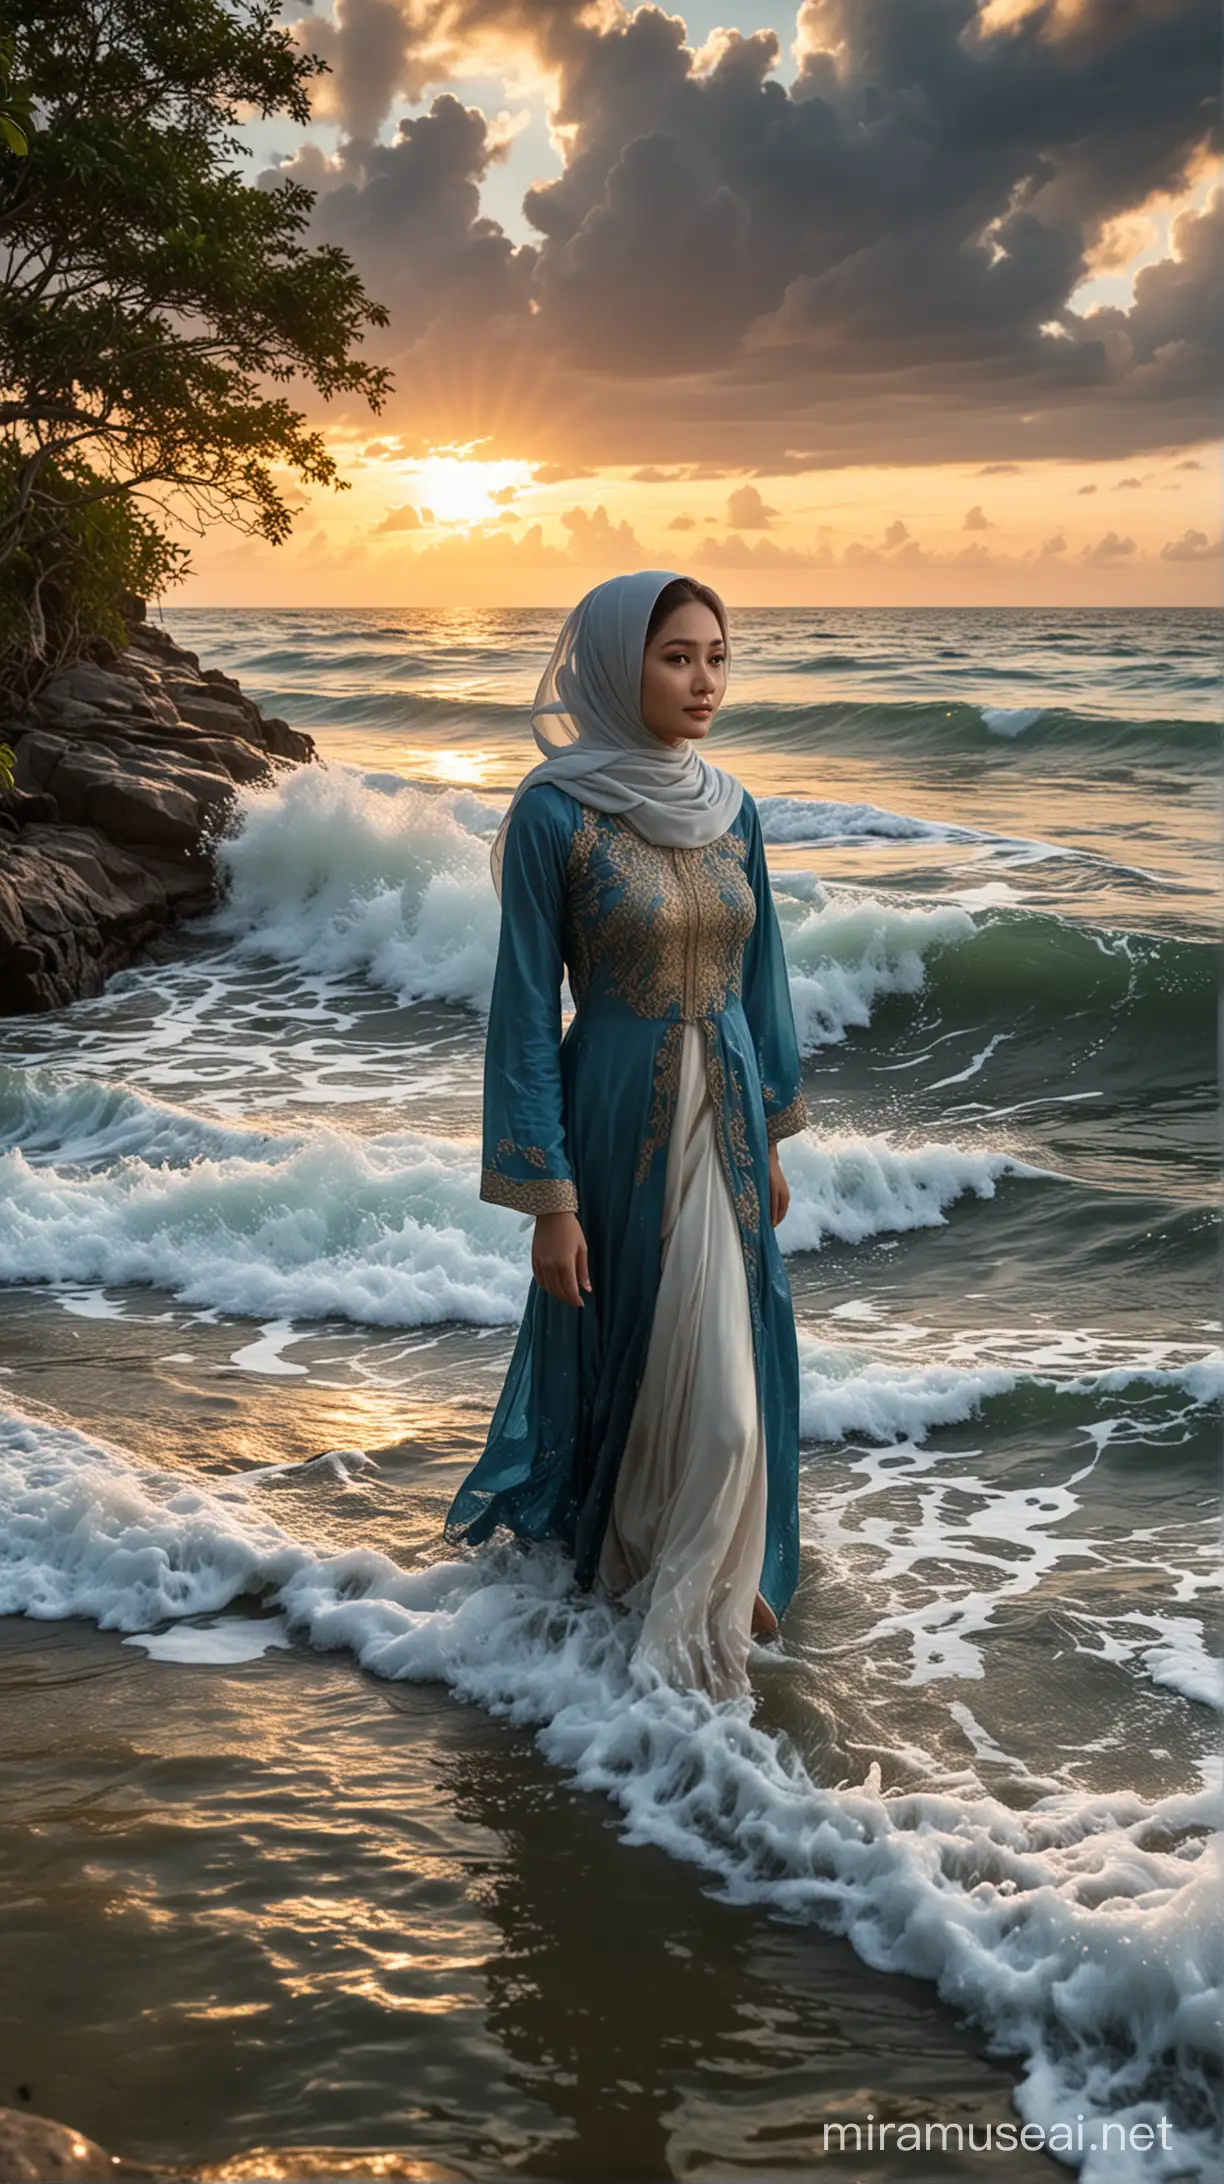 {(National Geographic, underwater photography, 3D, HDR, 16k UHD photo), (A beautiful Malaysian girl (face like Fazura), solo, wear hijab, cover whole body, blue-peach kebaya), (floating dress, splashing water, wet dress splashed by big waves), (white surfs, big waves, sunset, sea, trees, rocks, island, perfect light and puffy clouds, dramatic golden crepuscular rays)}